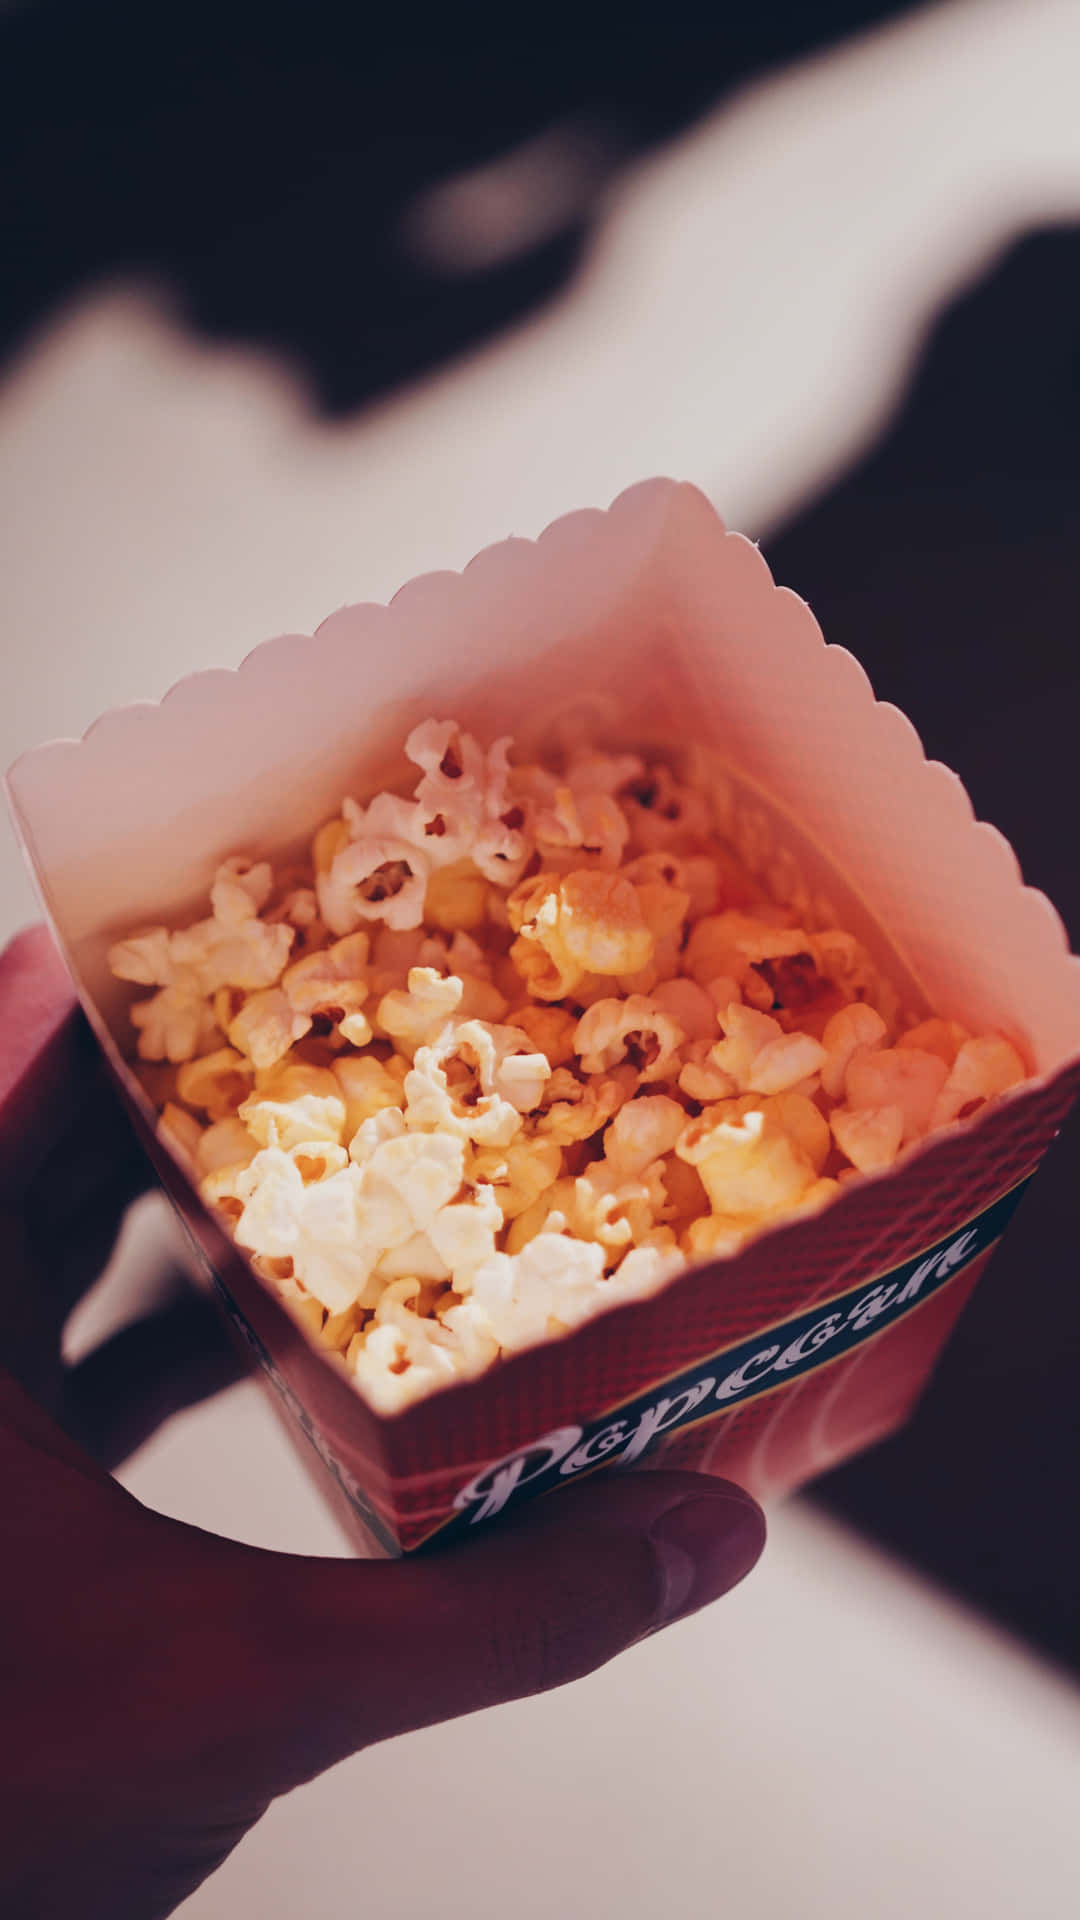 Munch away on delicious popcorn